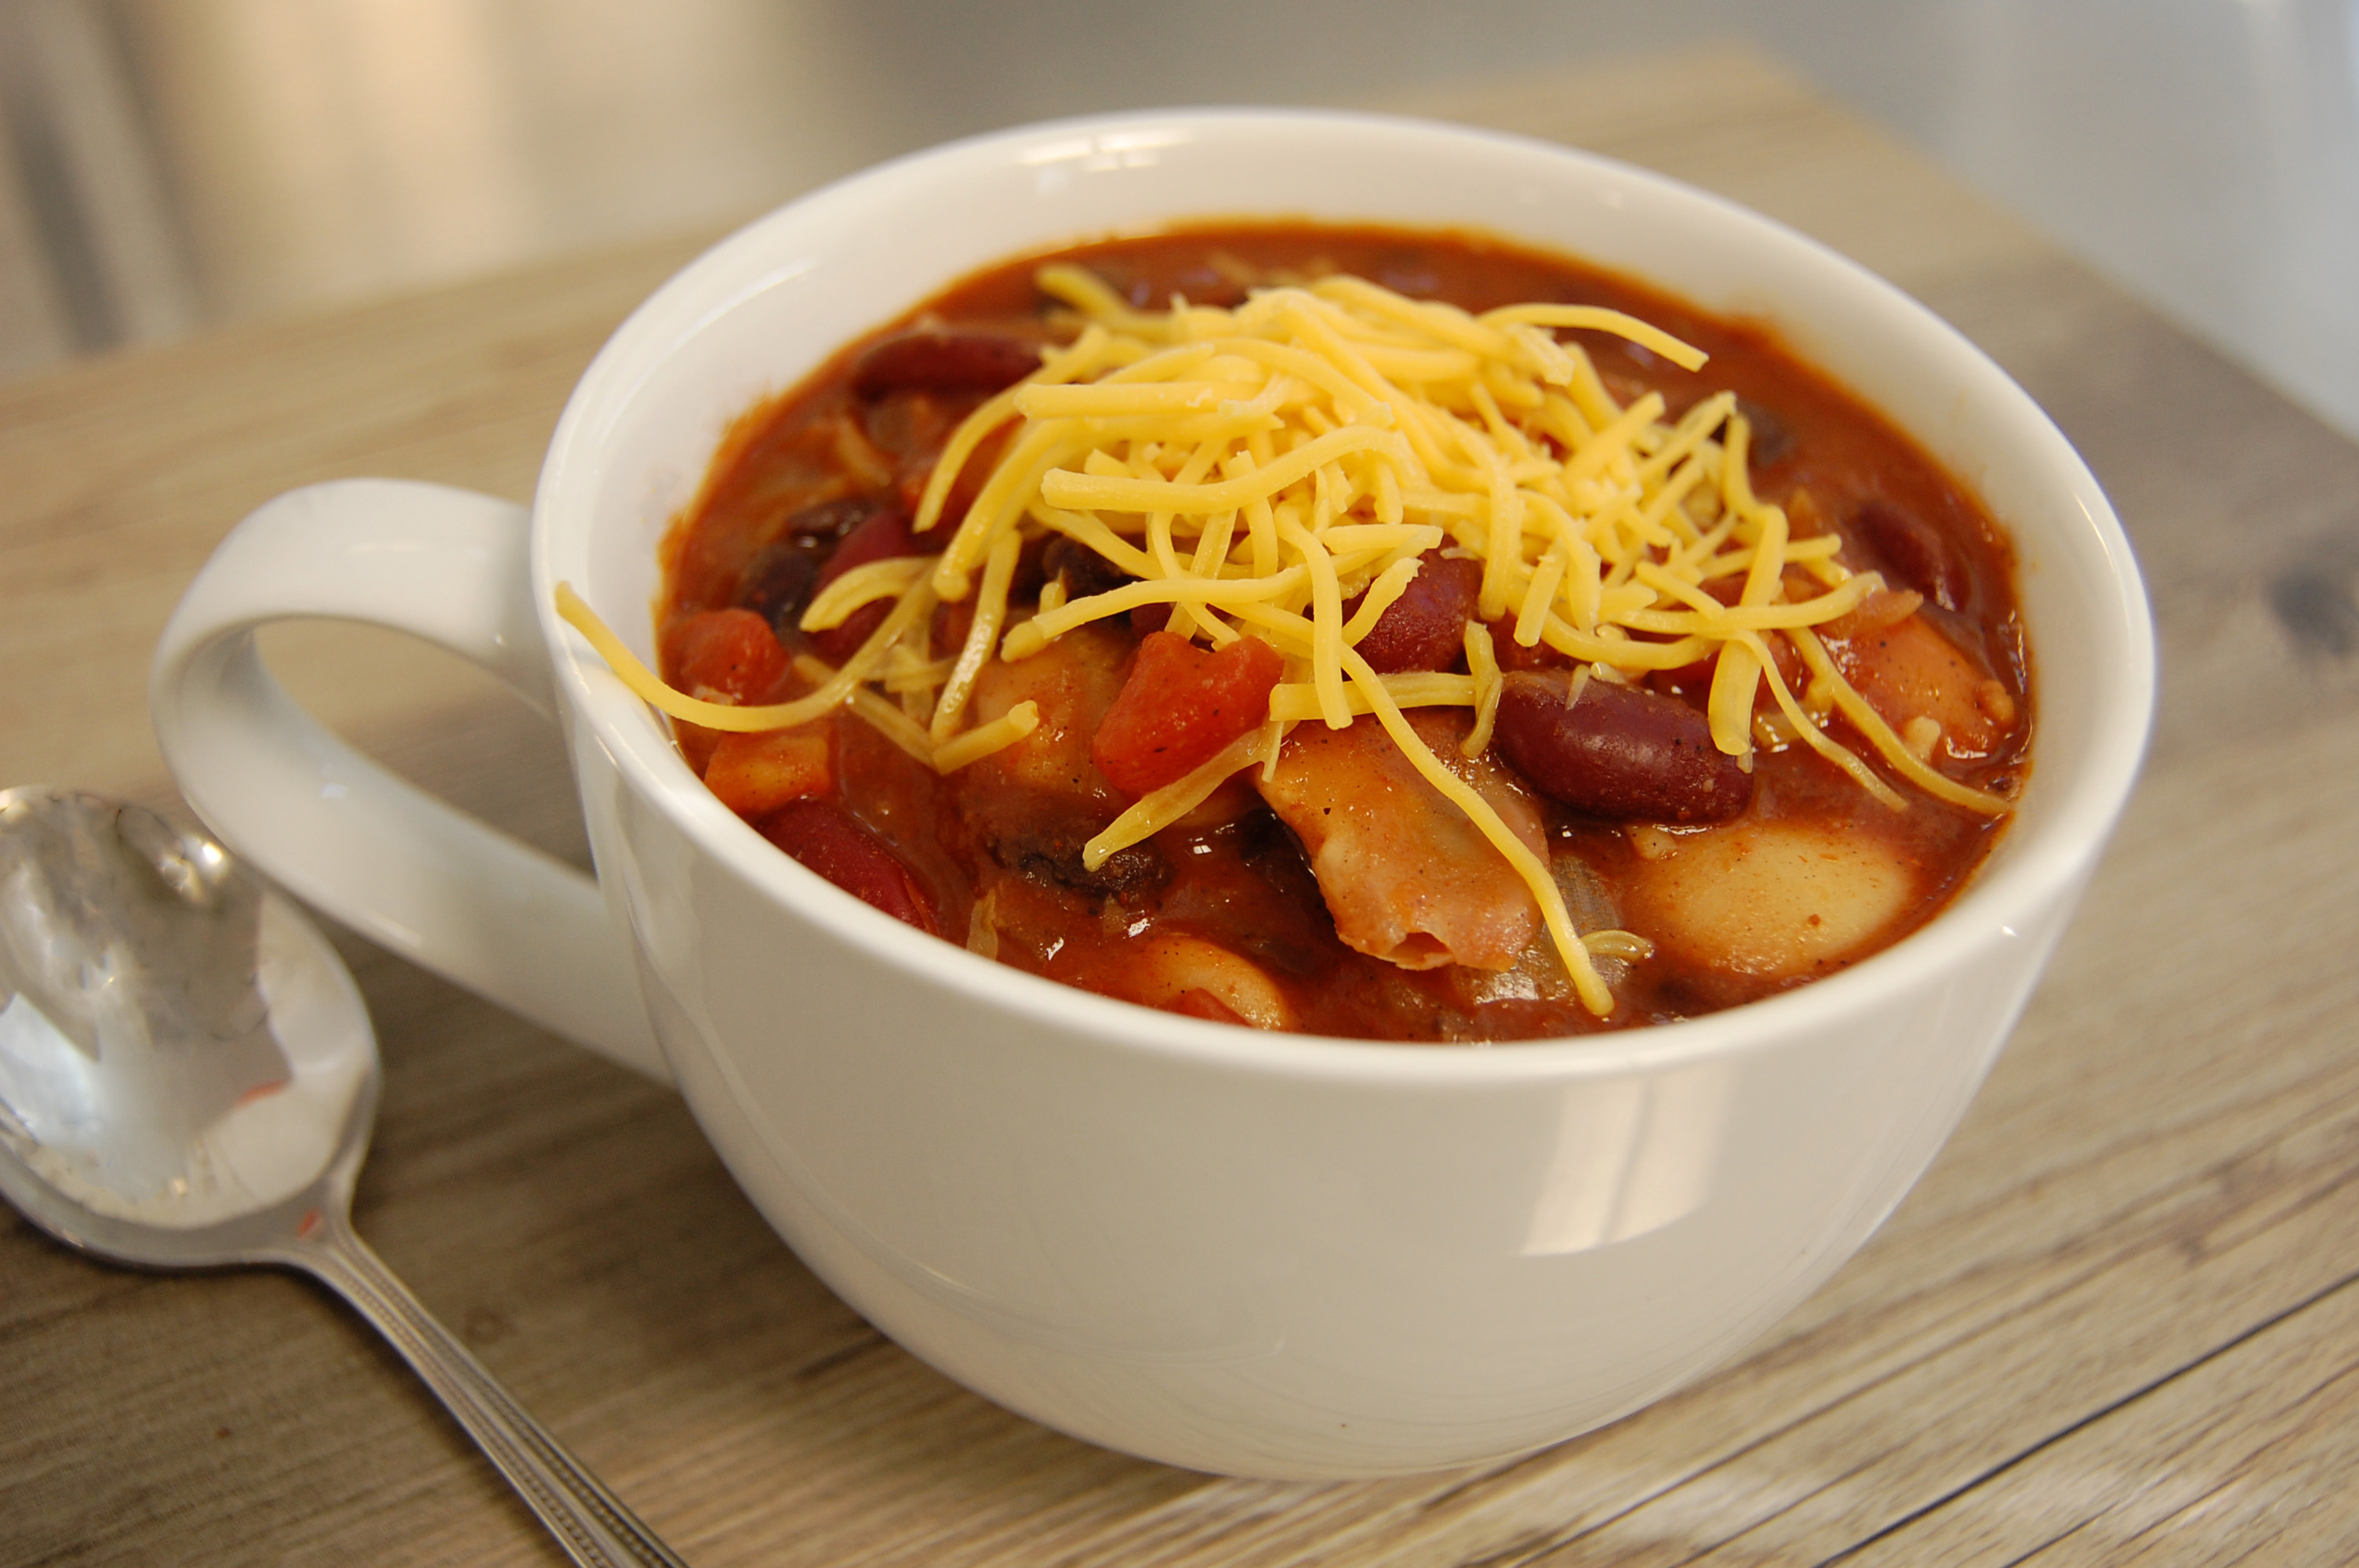 This one-dish meal includes beans, which are rich in fiber, protein, folate and other vitamins. (NDSU photo)